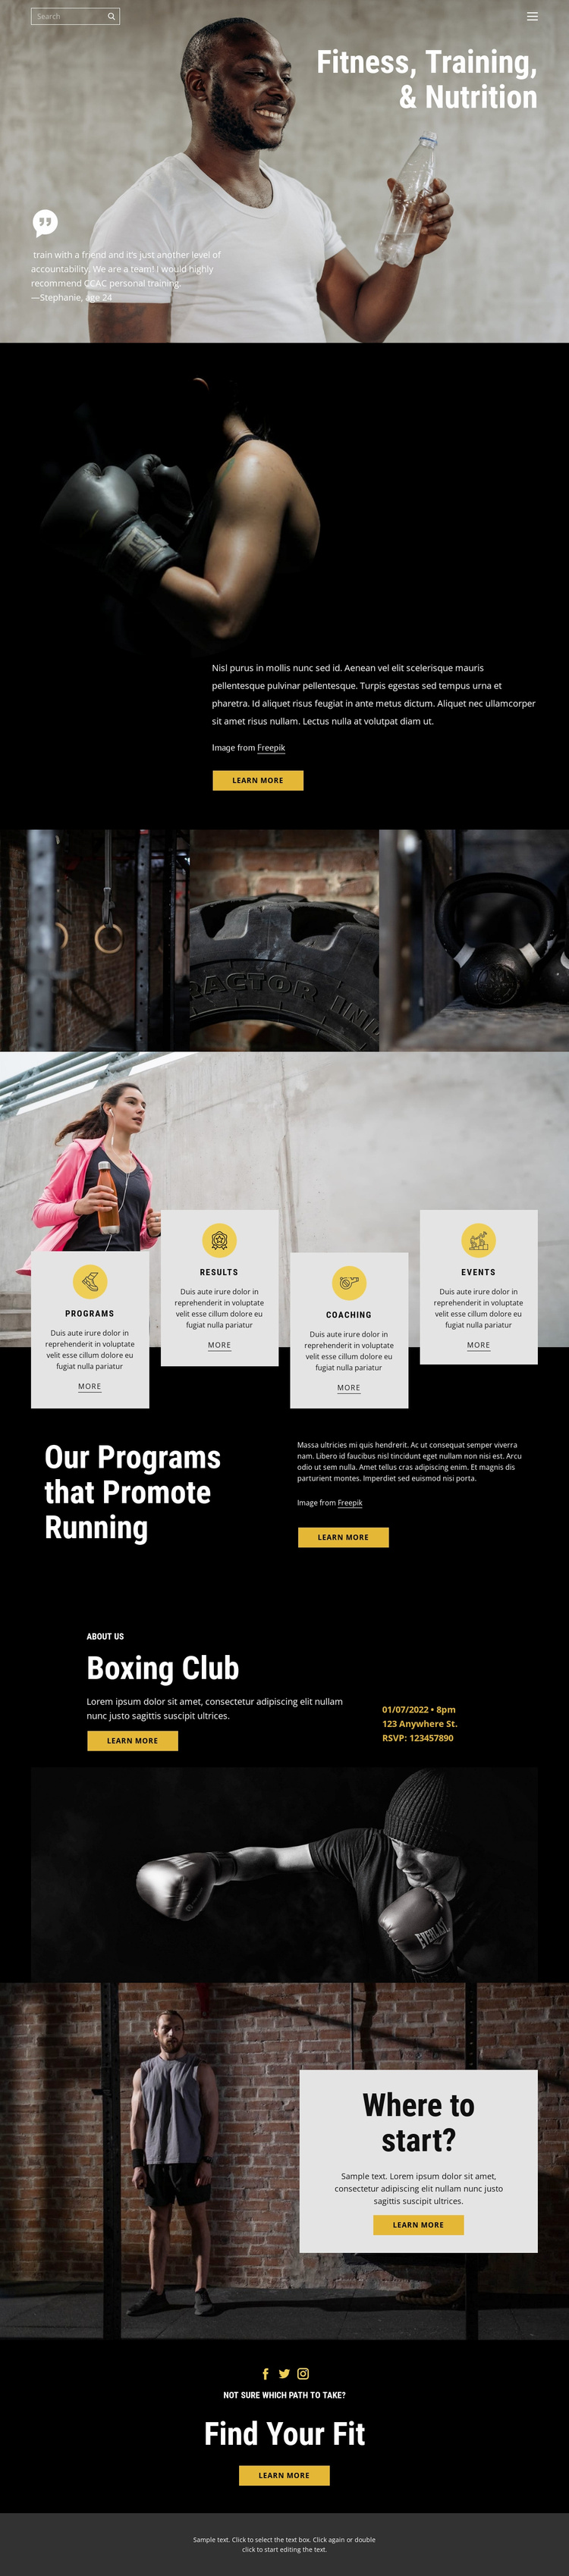 Kickboxing and crossfit Website Template